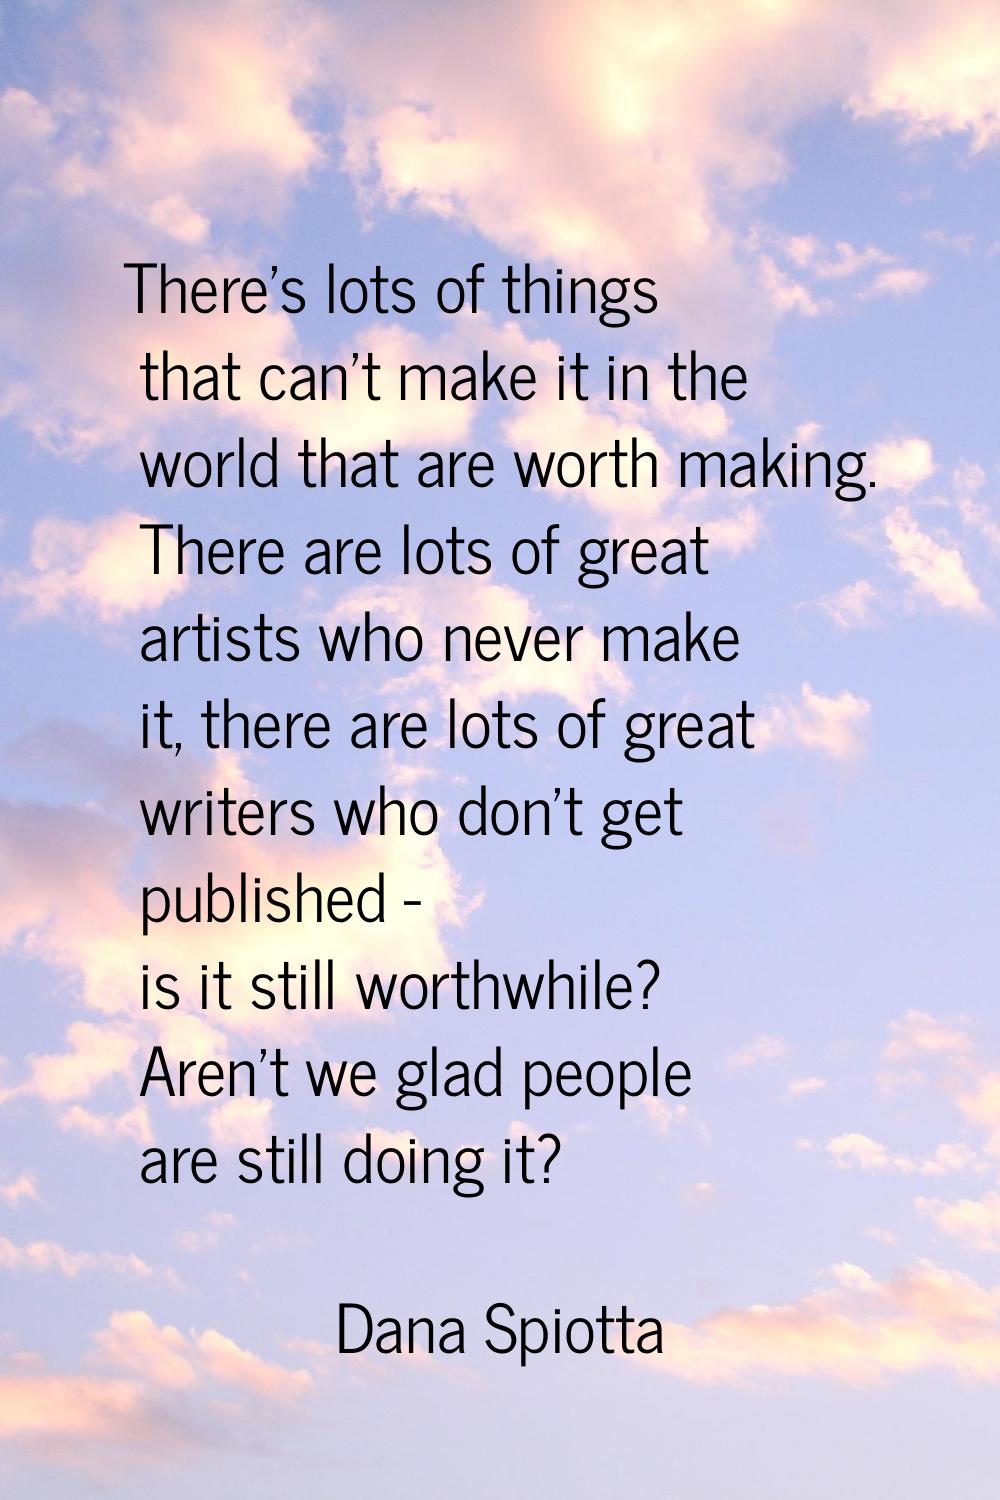 There's lots of things that can't make it in the world that are worth making. There are lots of gre